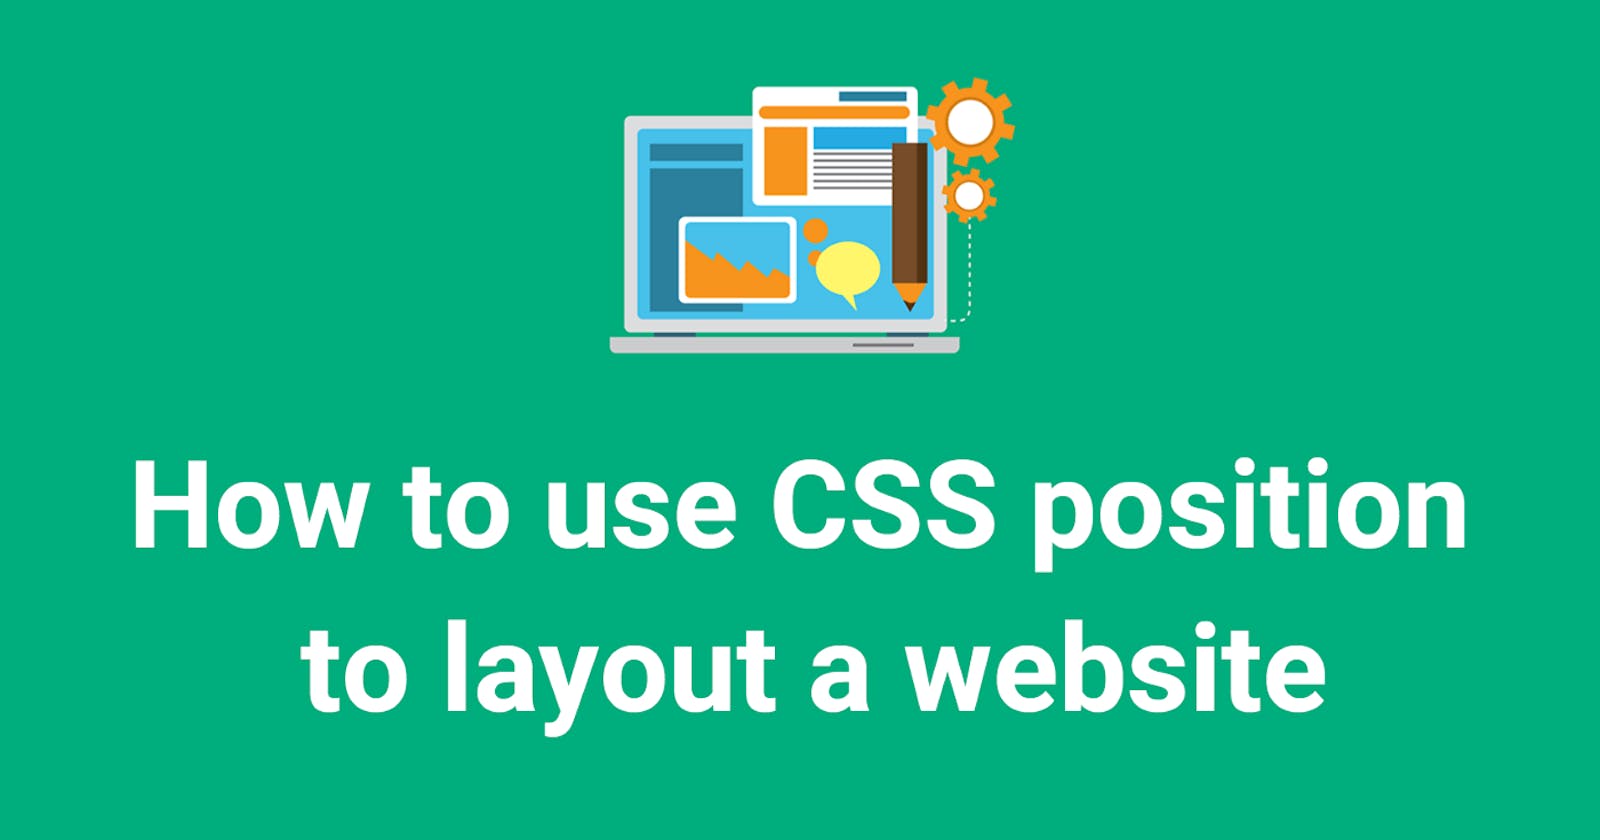 CSS Position to layout a website